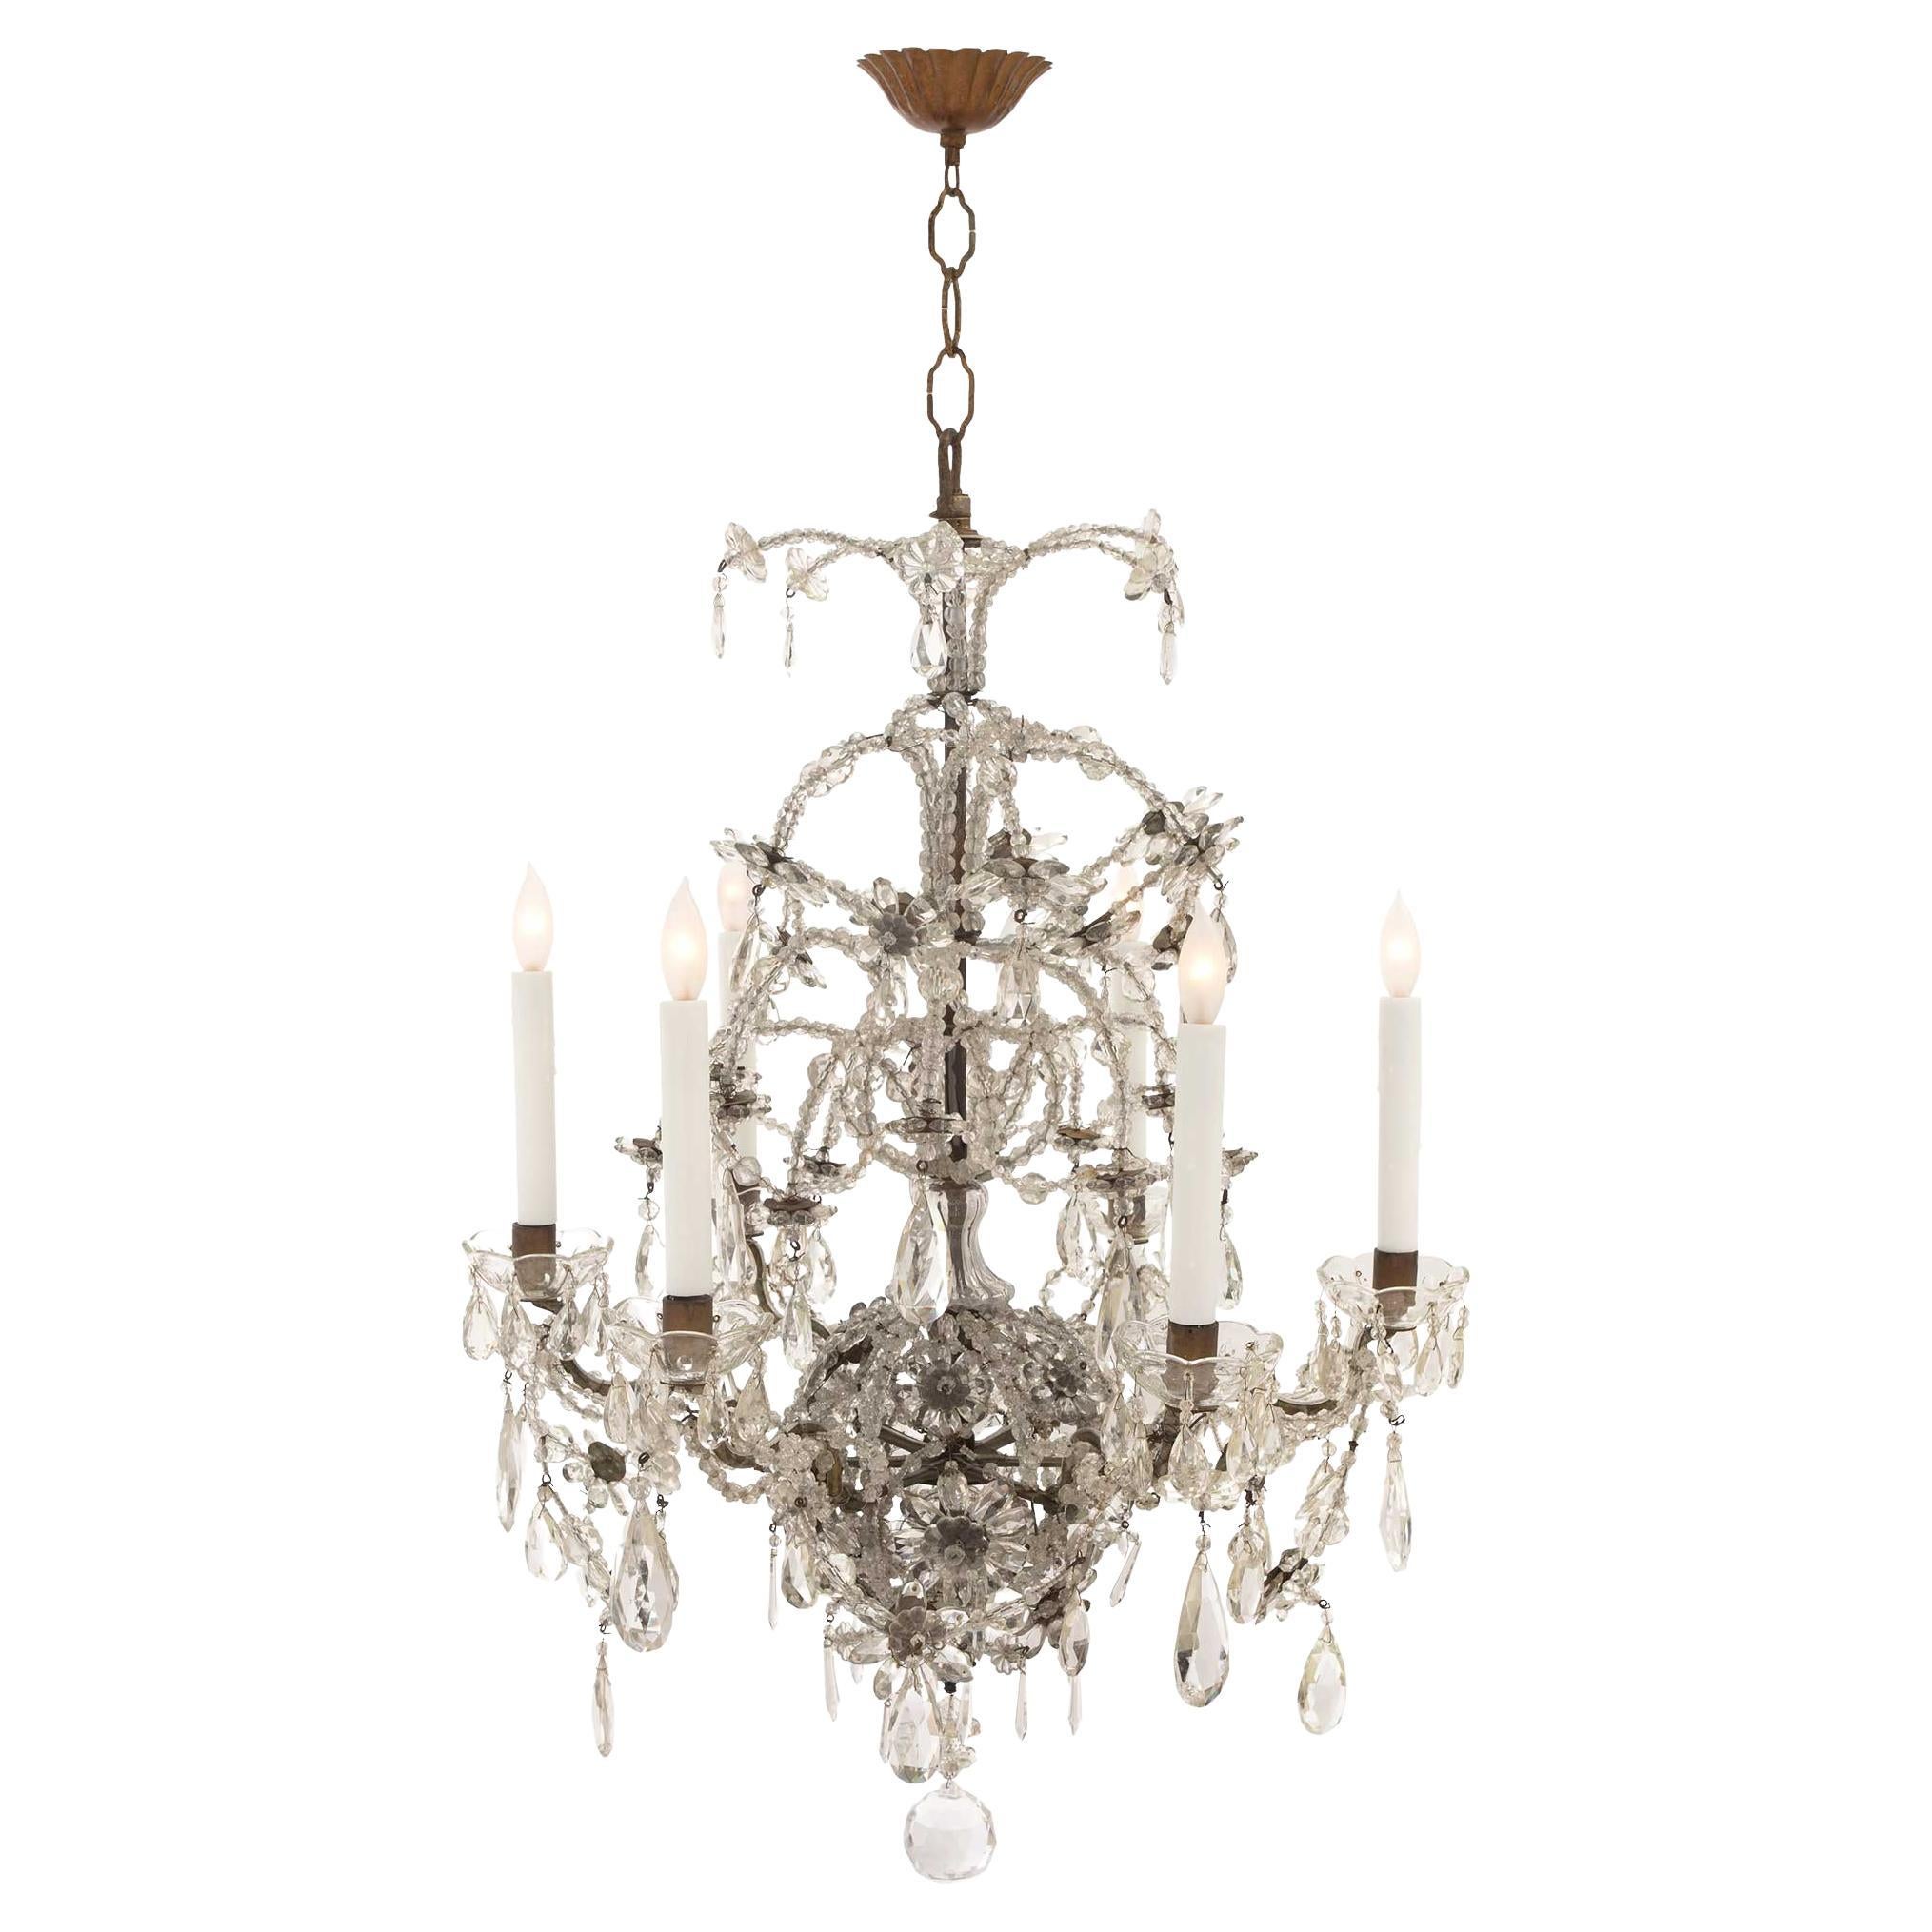 Italian 19th Century Louis XV Style Crystal, Cut Glass and Iron Chandelier For Sale